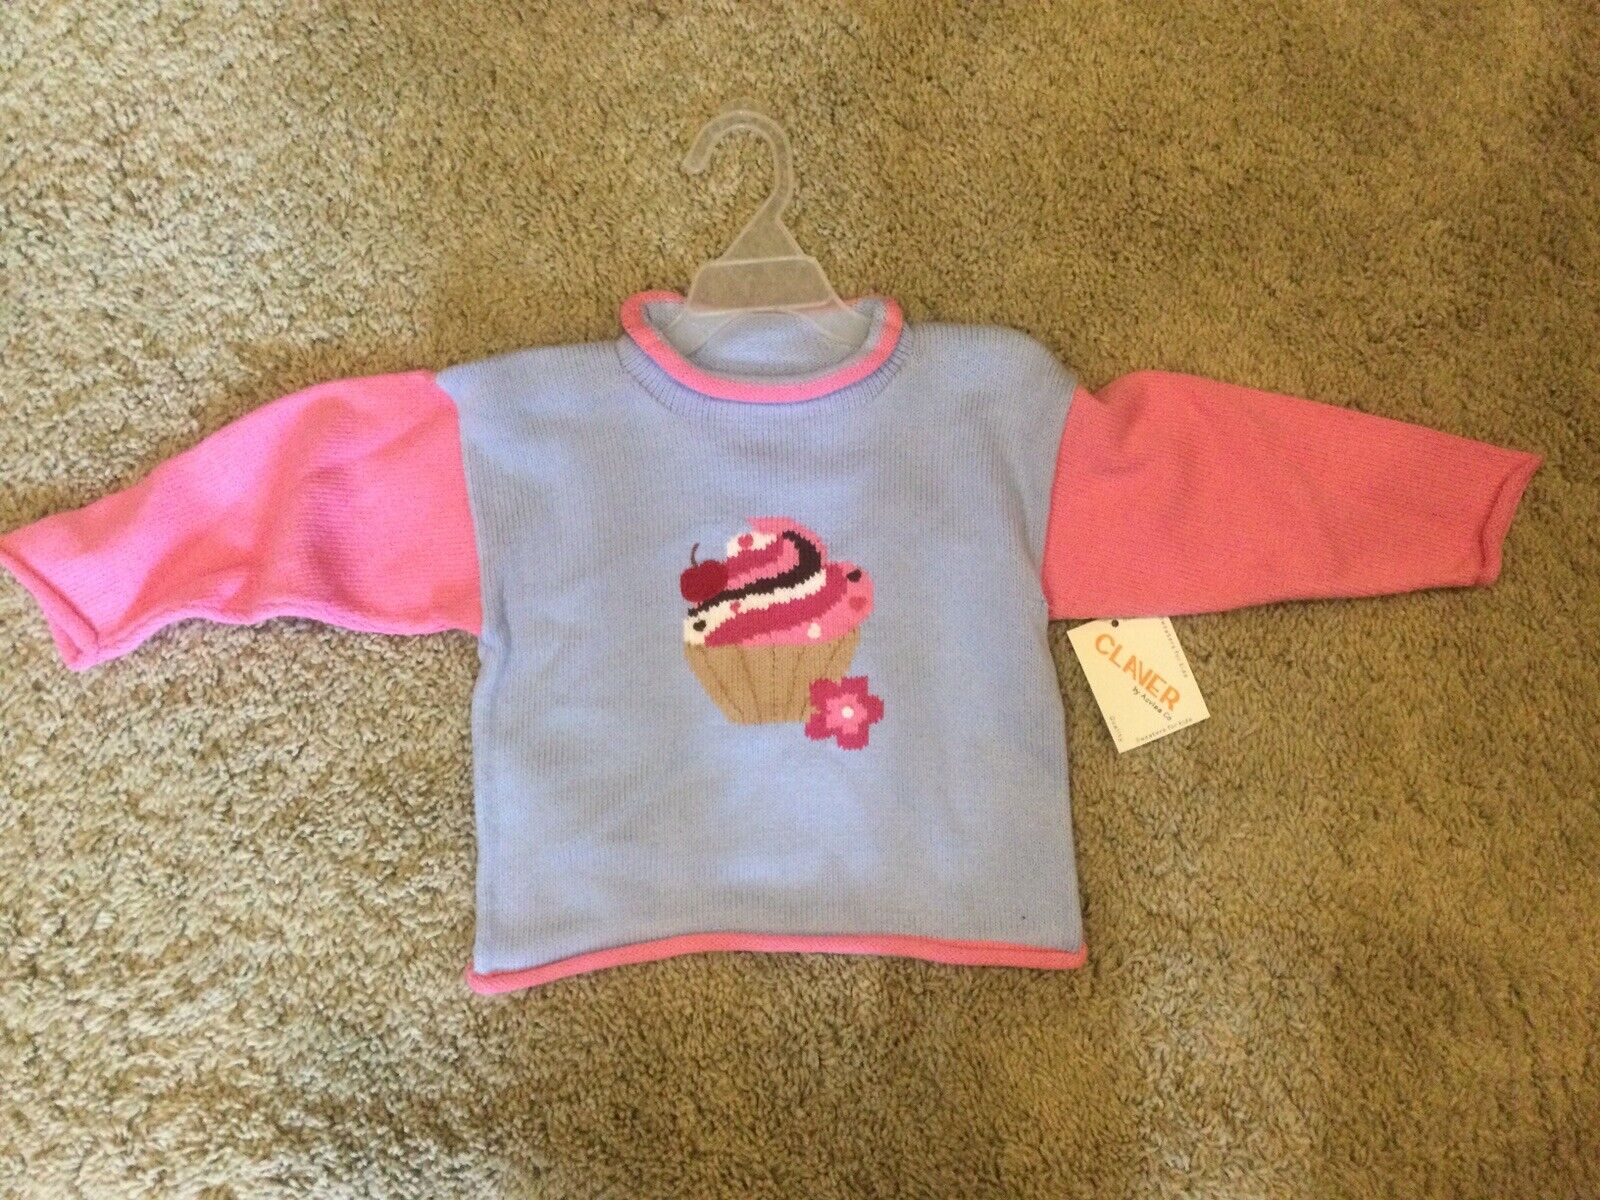 Nwt Claver sz 2t girl emb sweater neck Limited price cupcake Ranking TOP9 roll